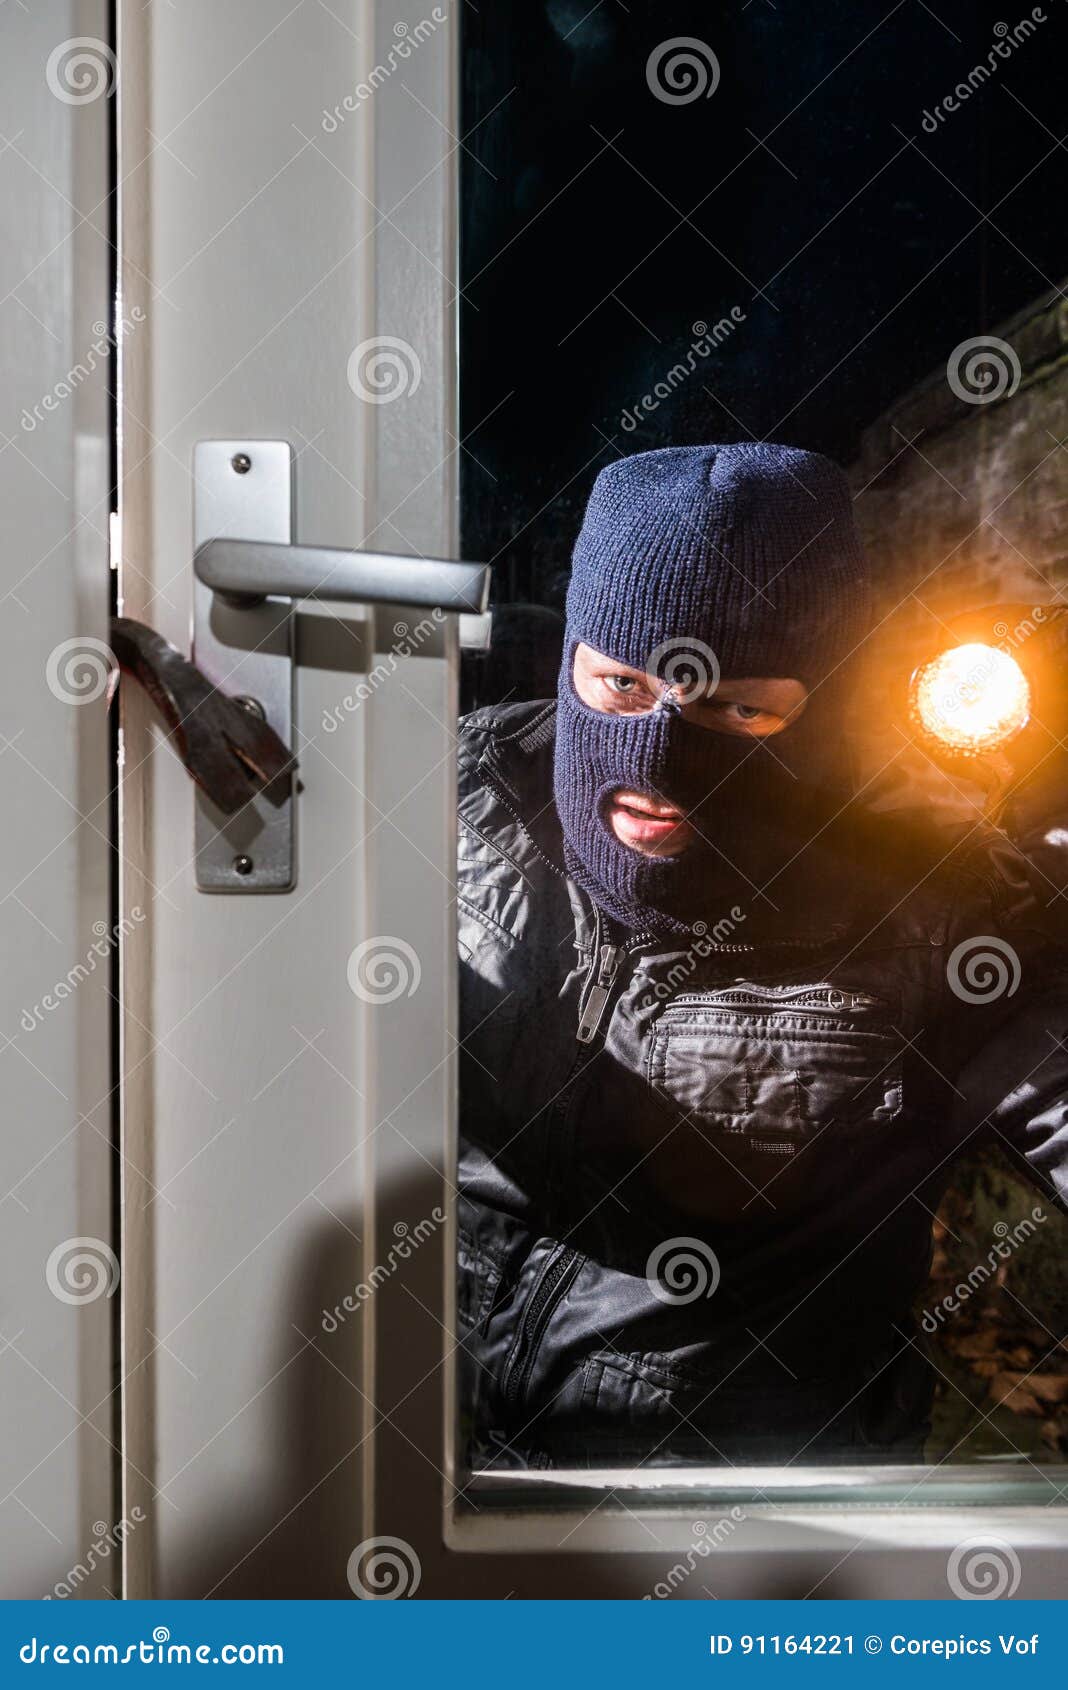 masked intruder holding torch while trying to open window with c